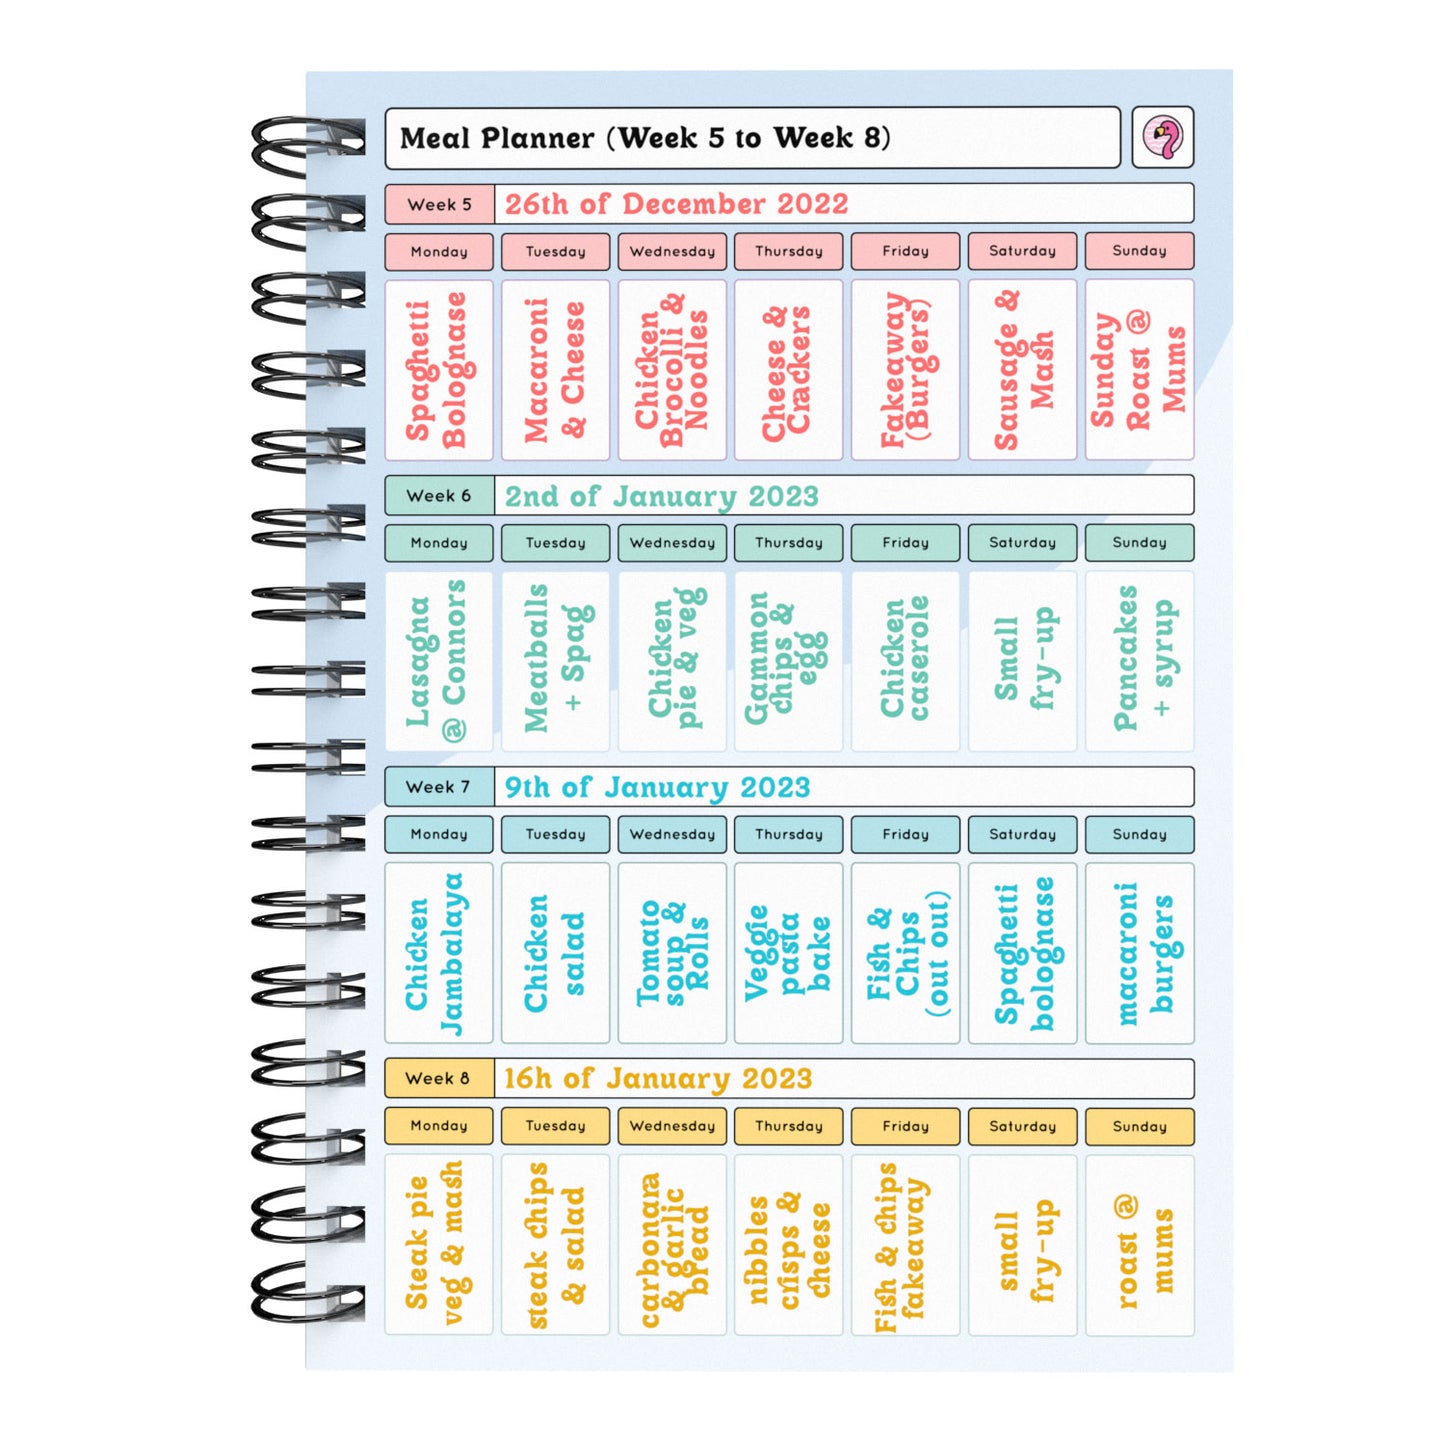 Food Diary - C32 - Calorie Counting